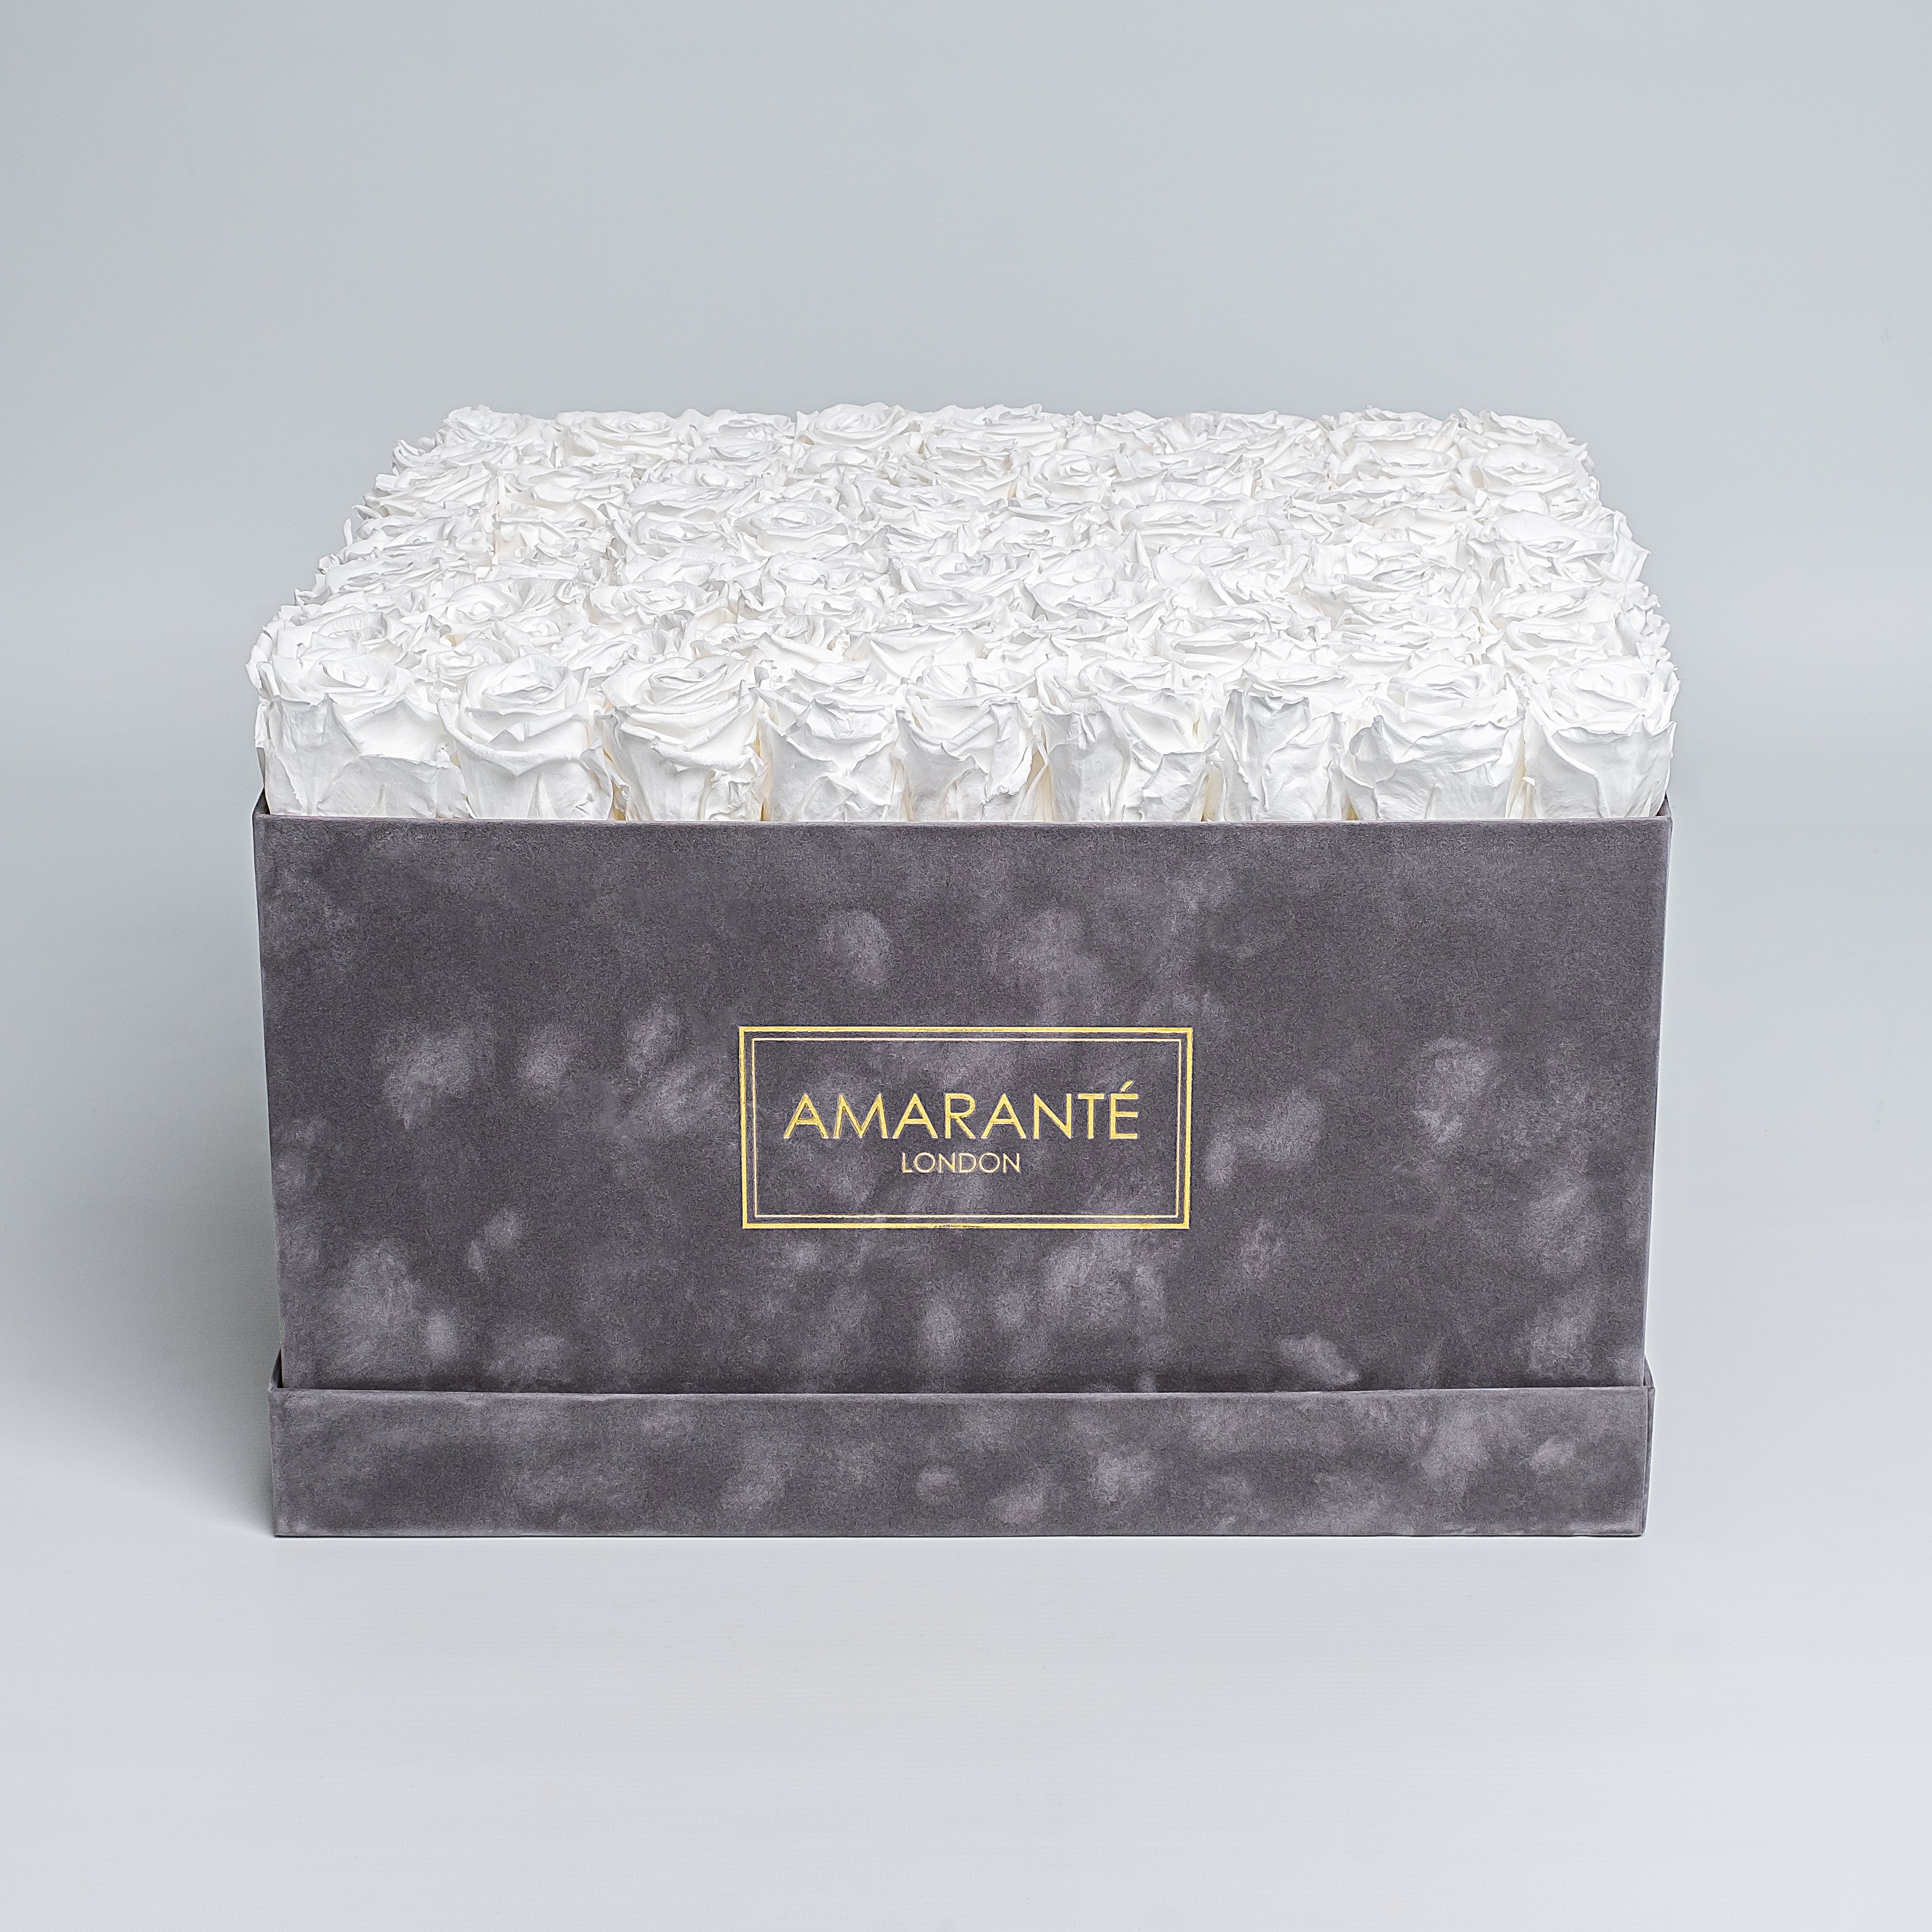 Elegant extra large grey suede hatbox with 100 large white infinity roses, a symbol of enduring love. Rose Box dimensions are 16"x16", with free UK delivery, choose your infinity roses from 14 exquisite colours - Amaranté London.